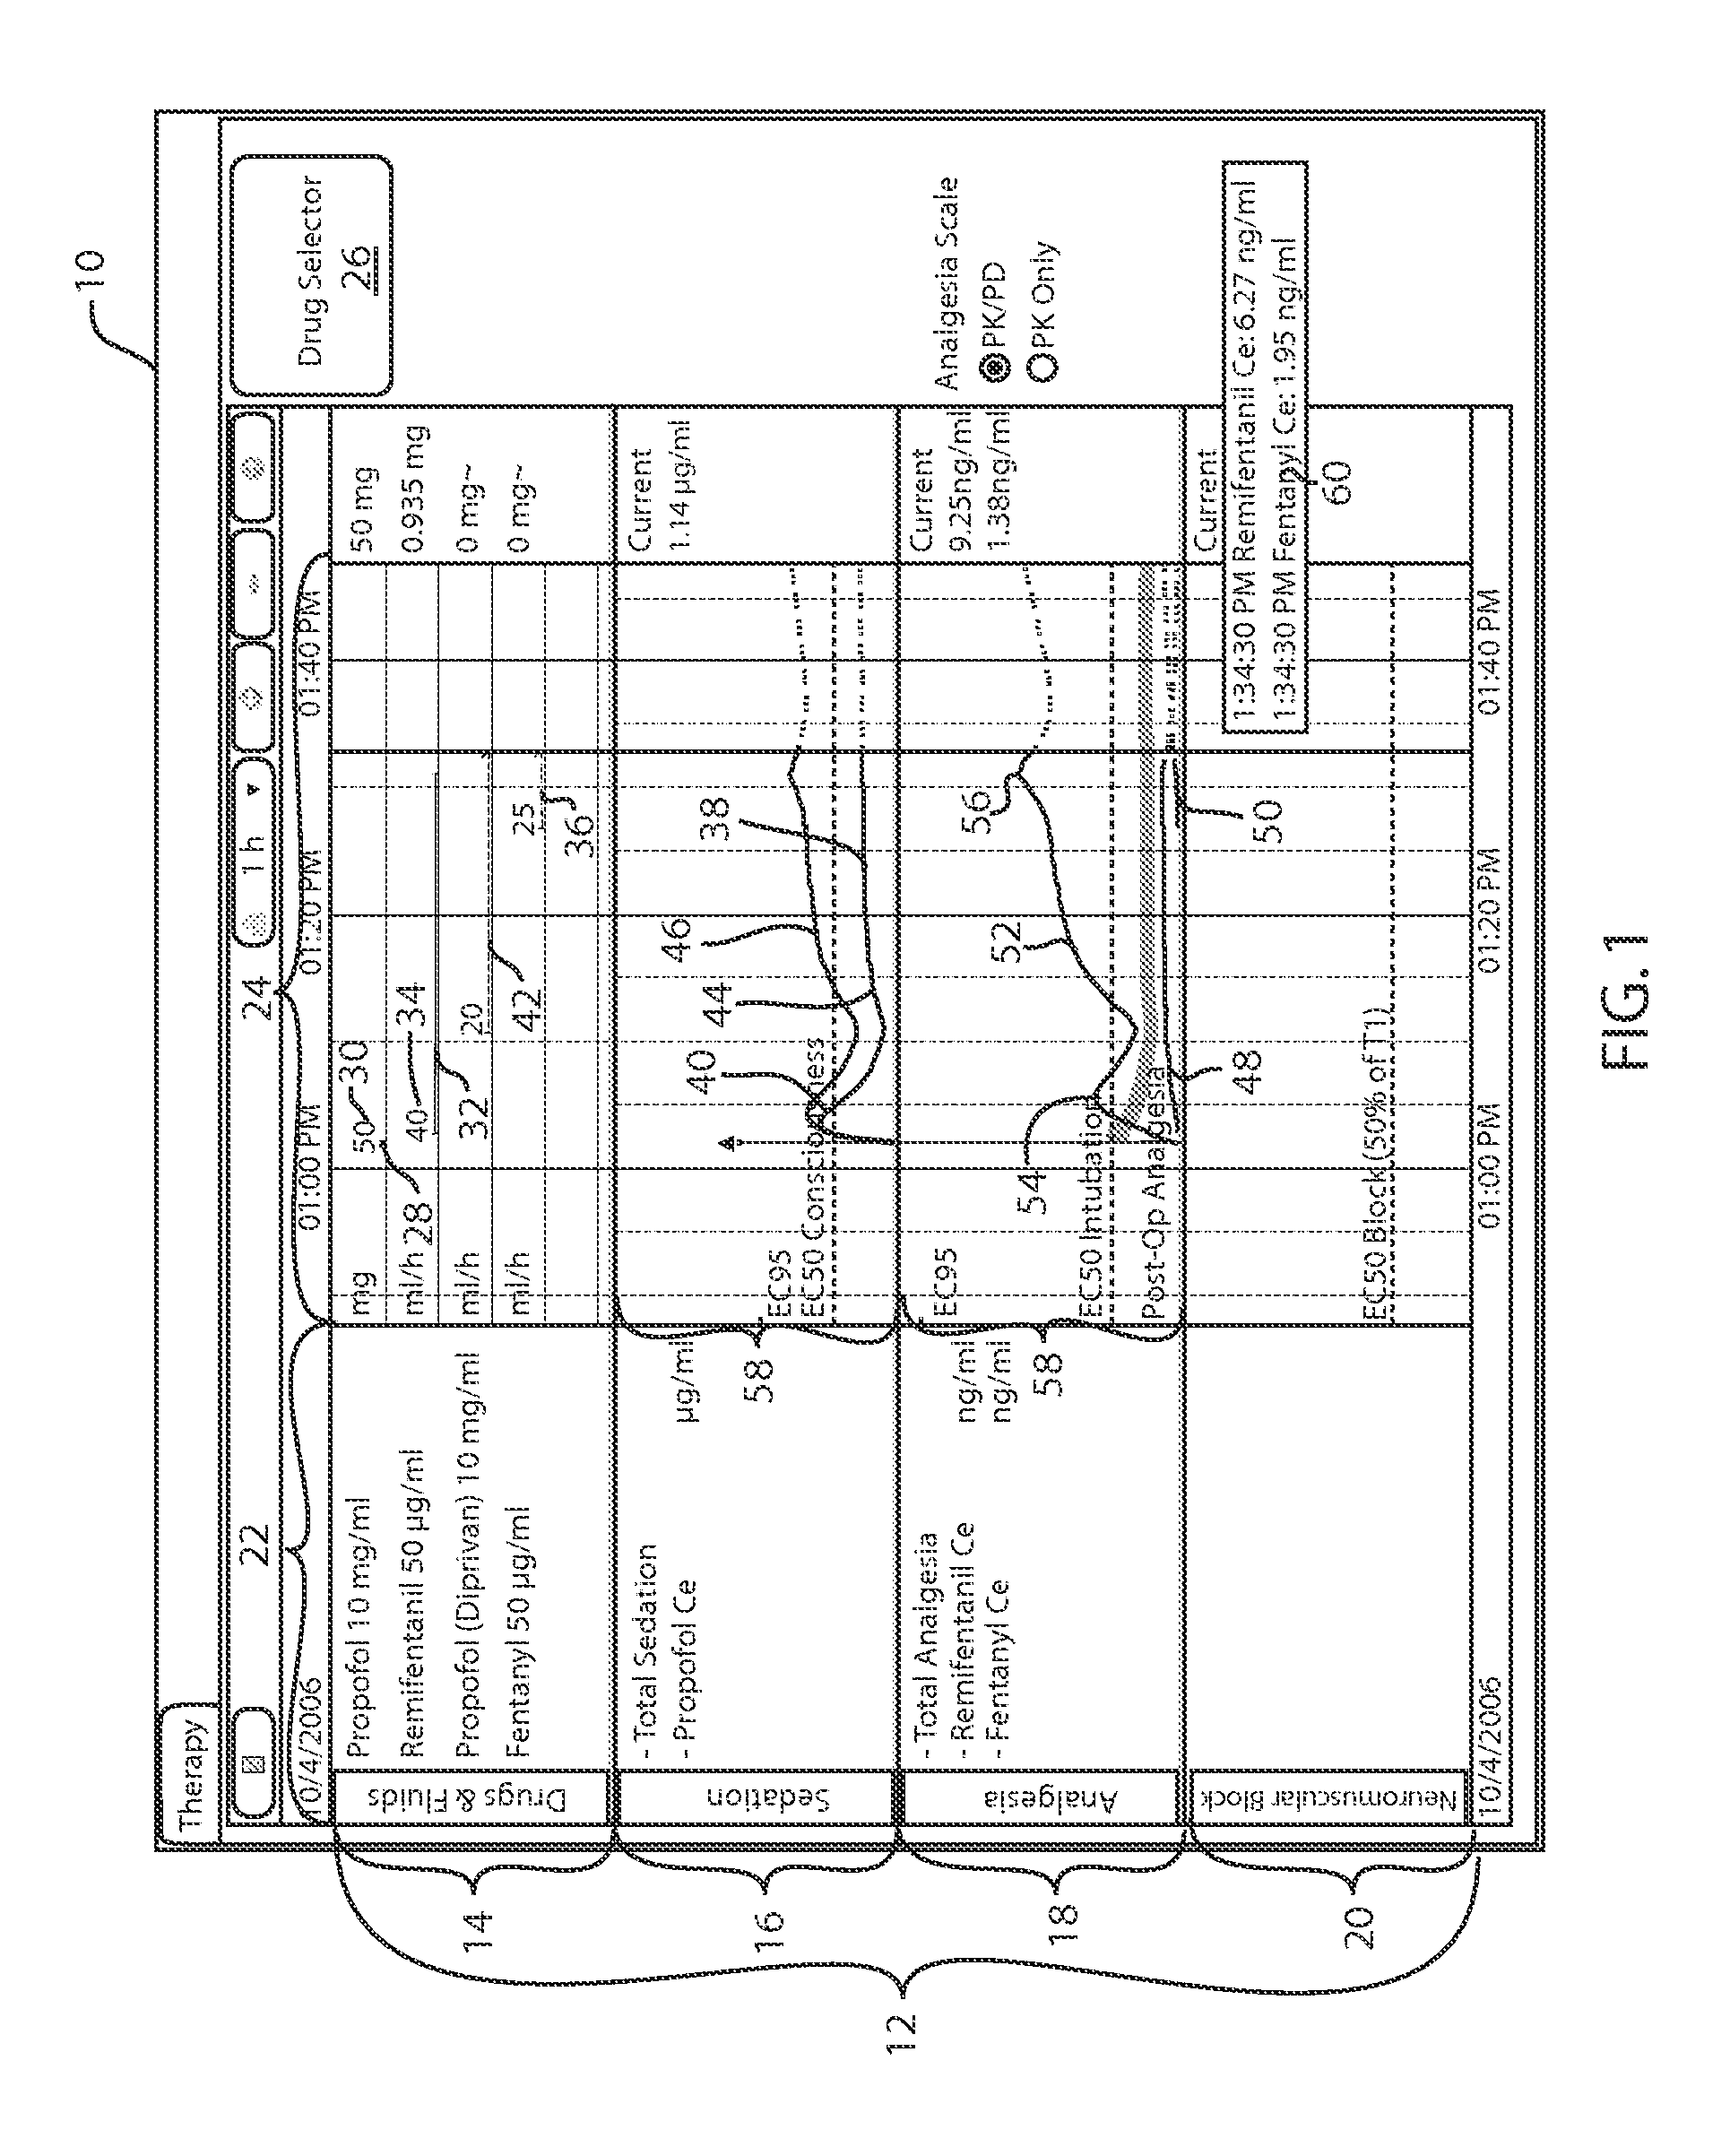 System and method of safely displaying PK/PD anesthetic drug models